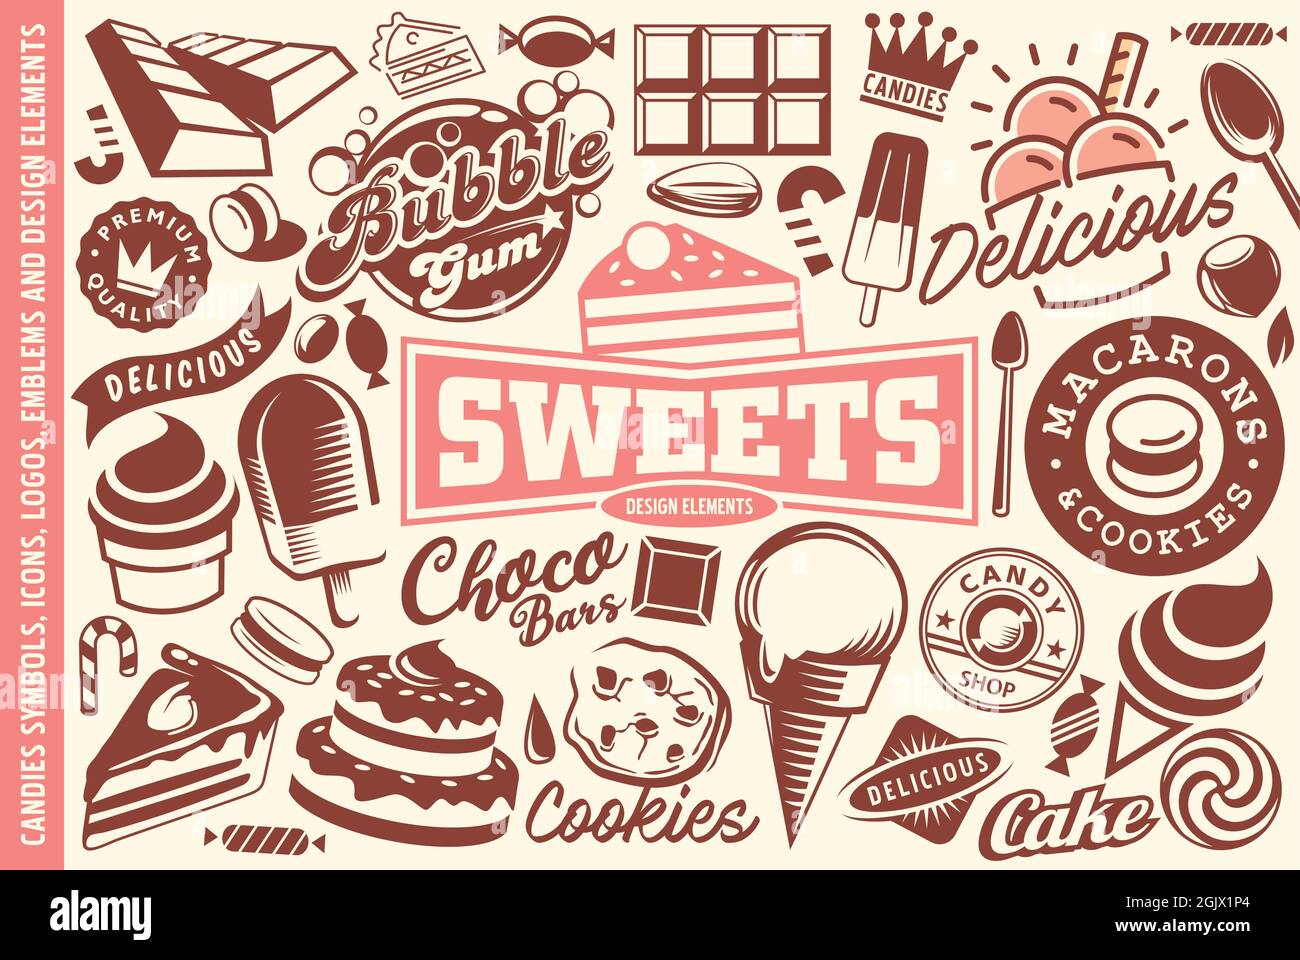 Sweets, desserts. ice creams, cakes, candies and cookies collection of logos, graphics,symbols,emblems icons and design elements. Sweet food vector Stock Vector